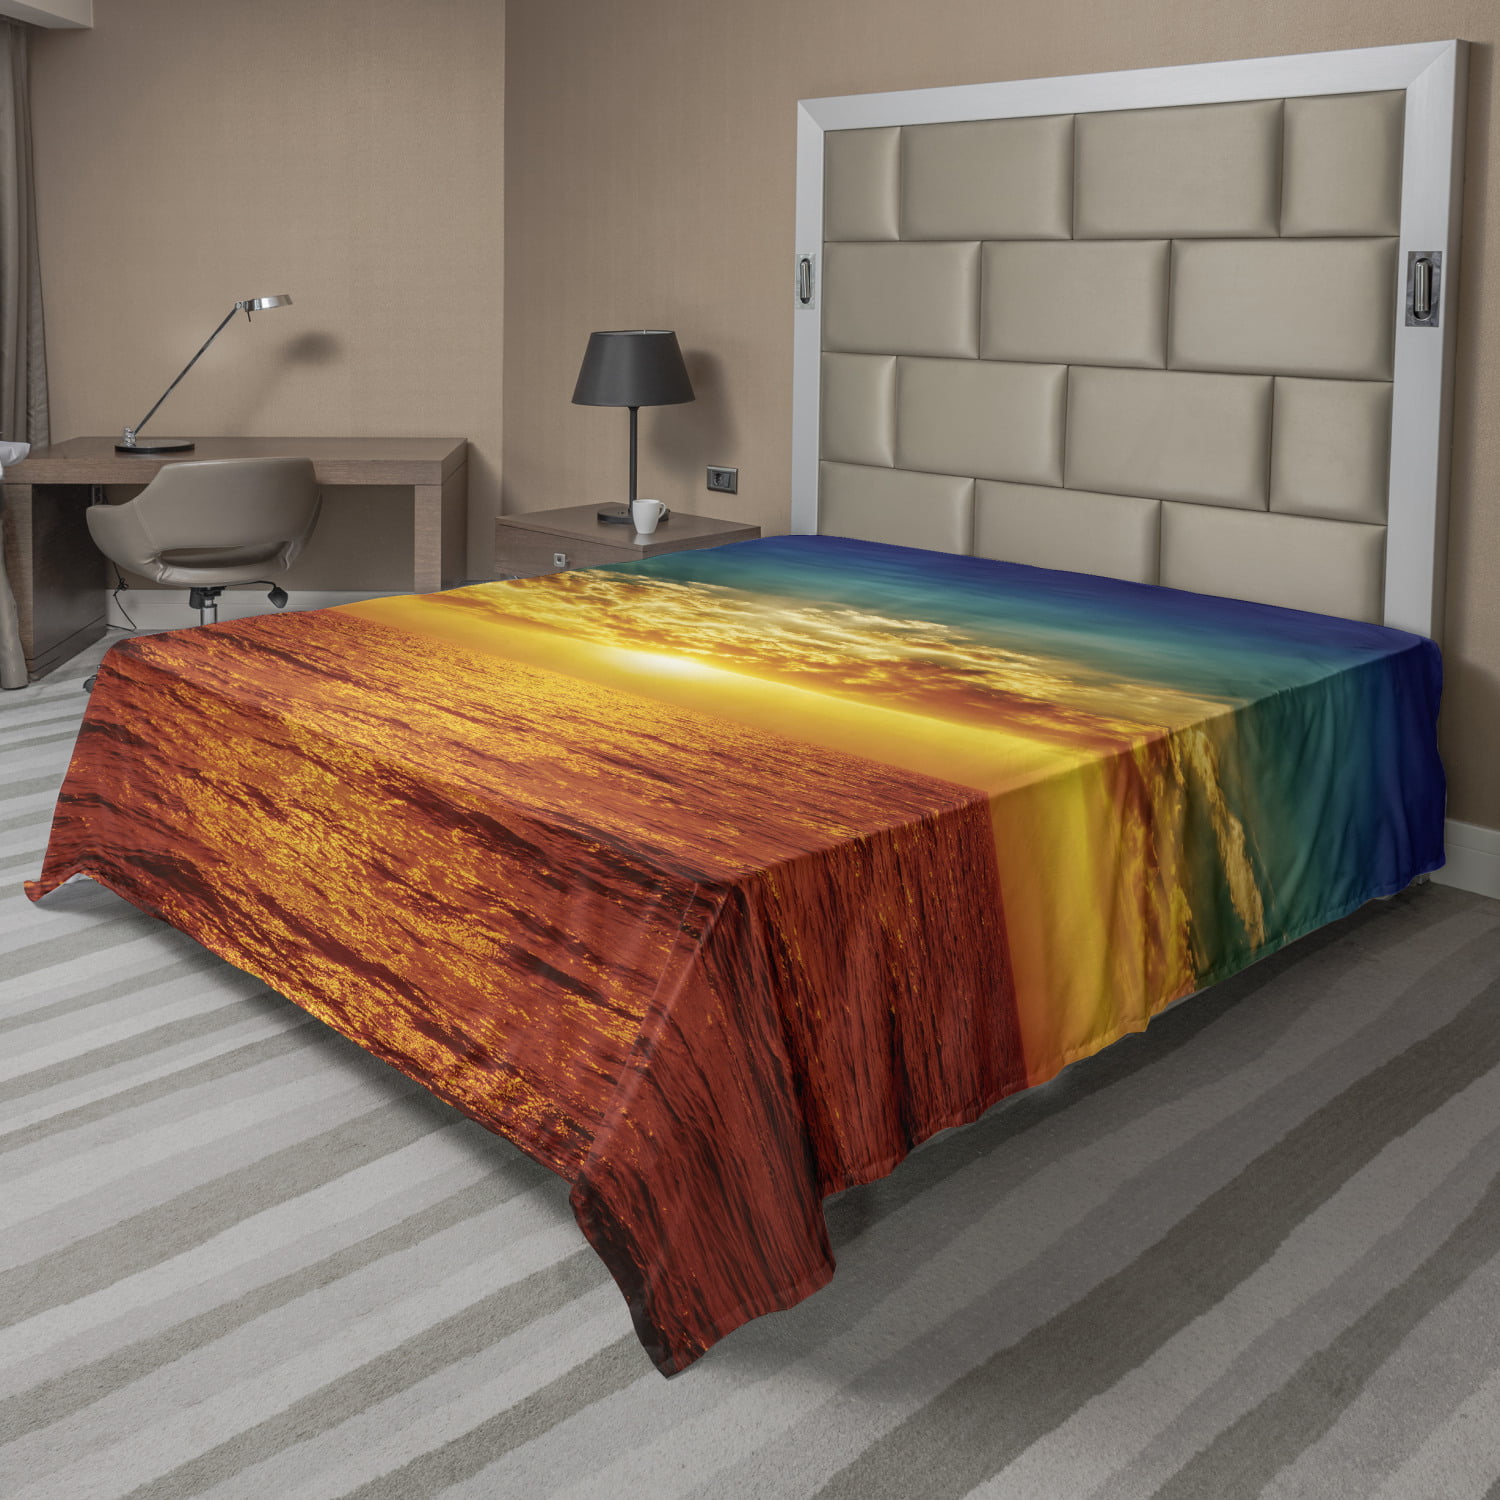 Details about   Ambesonne Surreal Abstract Flat Sheet Top Sheet Decorative Bedding 6 Sizes 